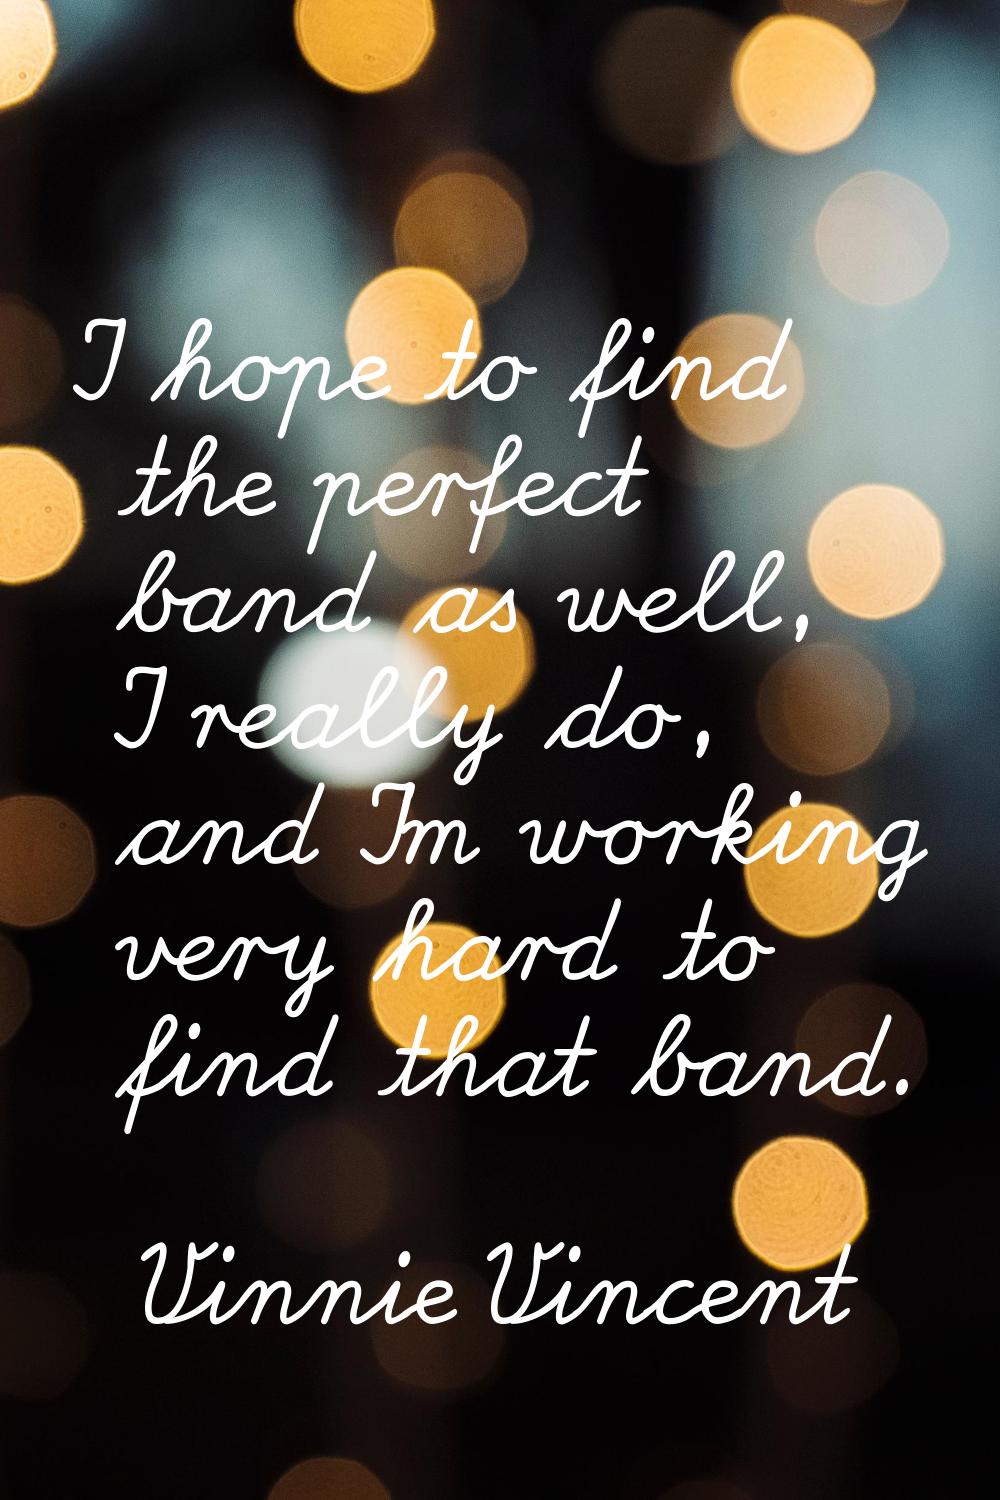 I hope to find the perfect band as well, I really do, and I'm working very hard to find that band.